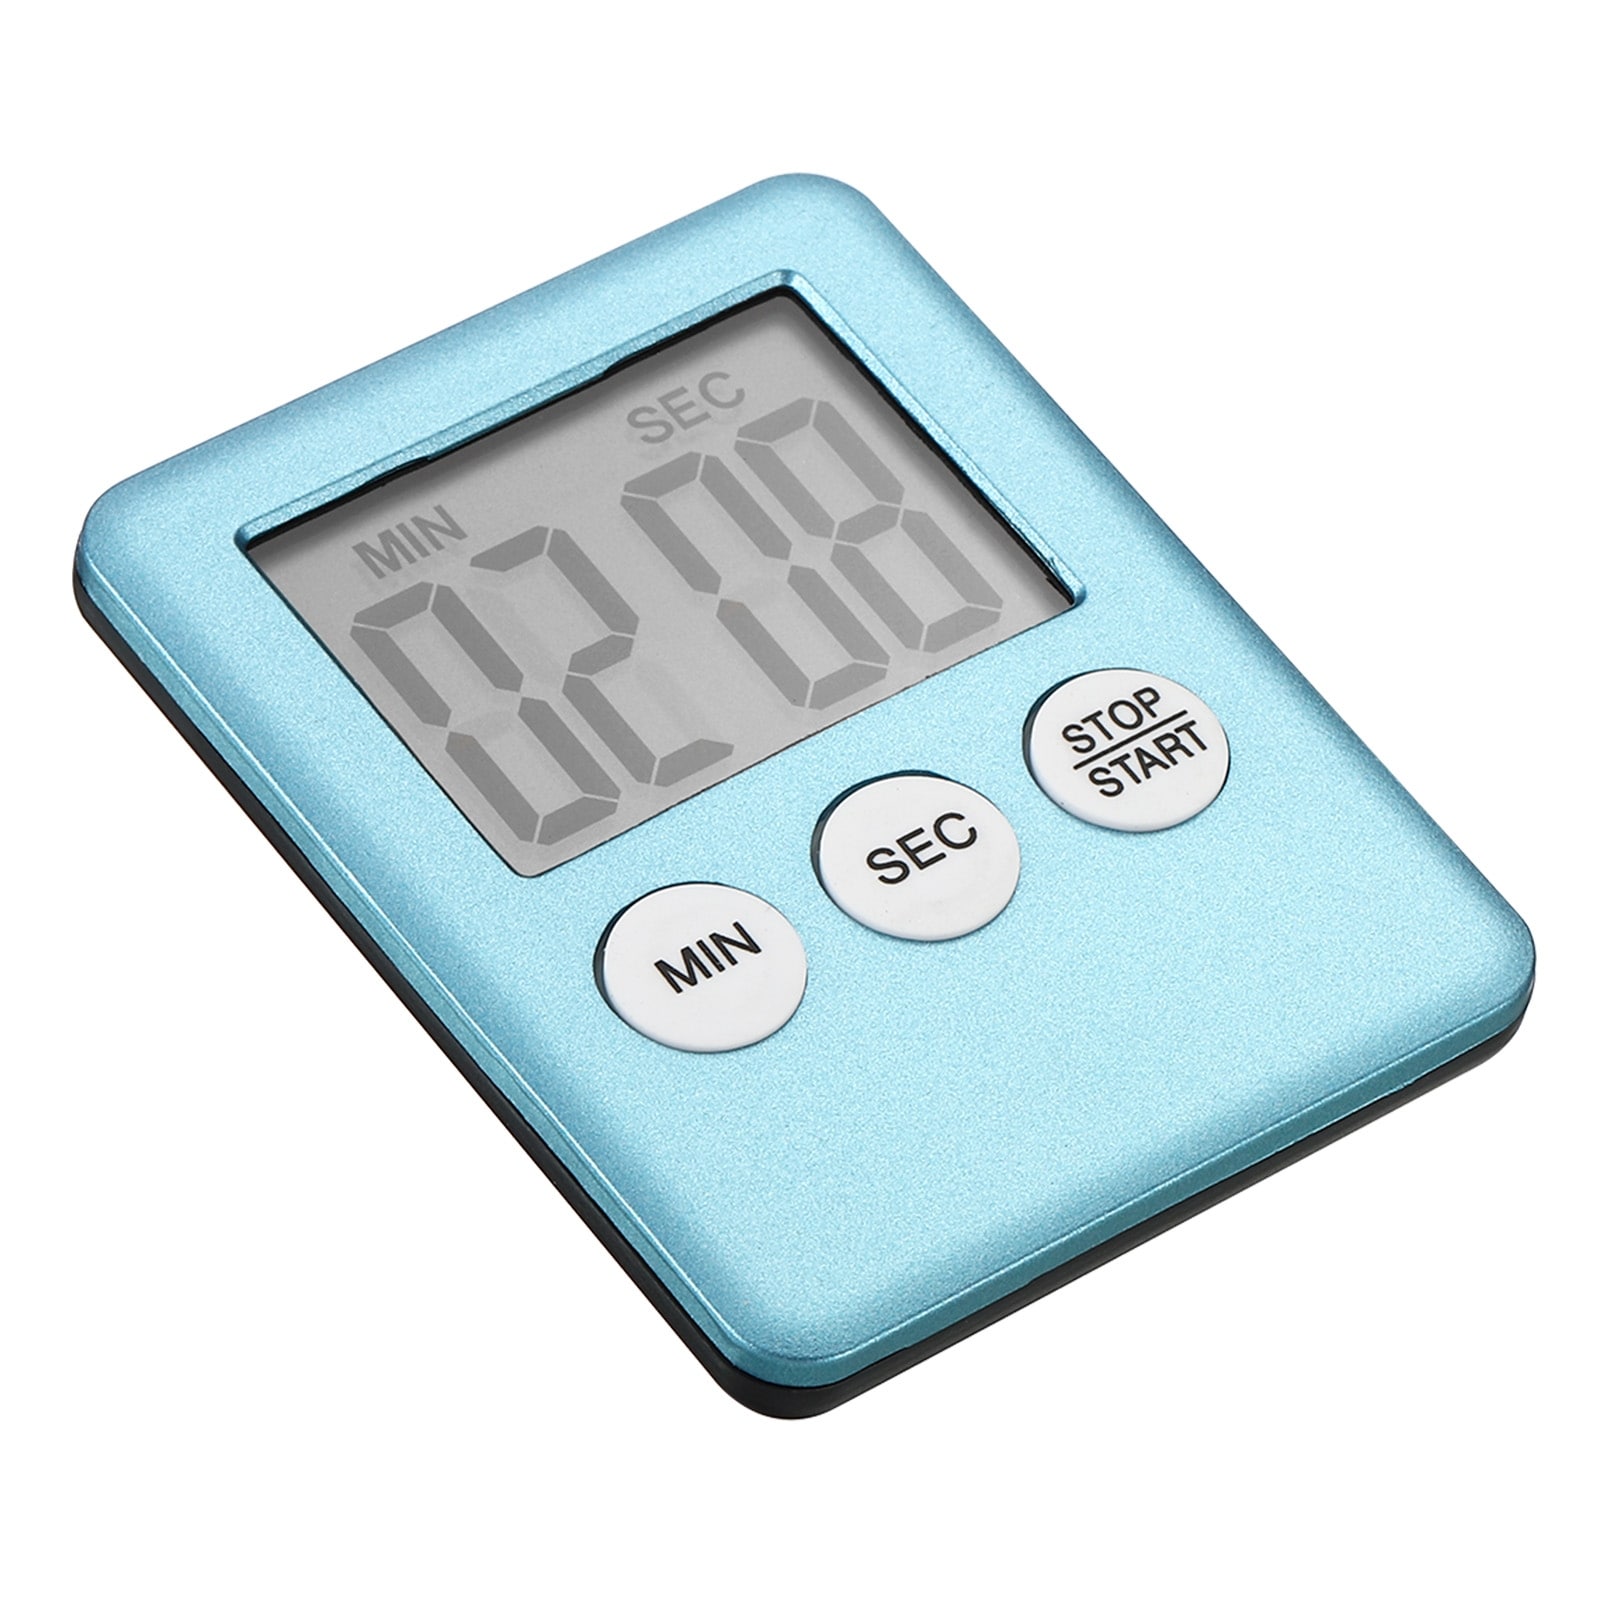 Mainstays Digital Kitchen Timer, Magnetic Countdown Count up Timer